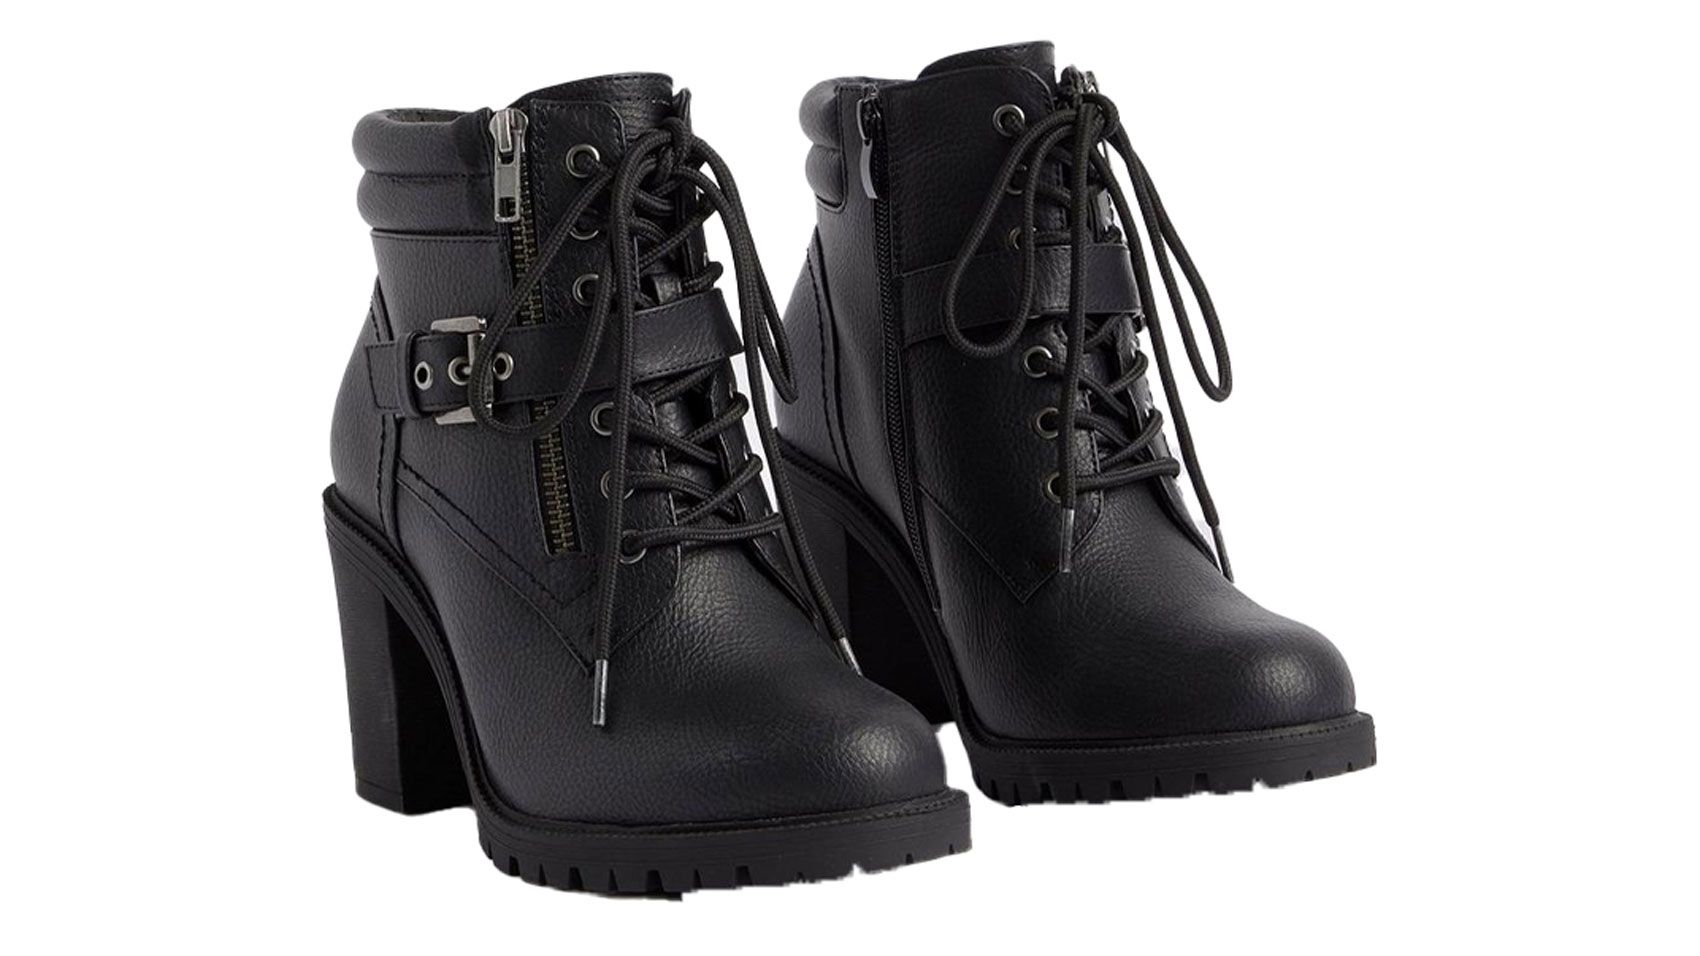 Dream Pairs Women's Combat Boots Lace Up Leather Ankle Booties Lug SolePlatform Mid Calf Boots